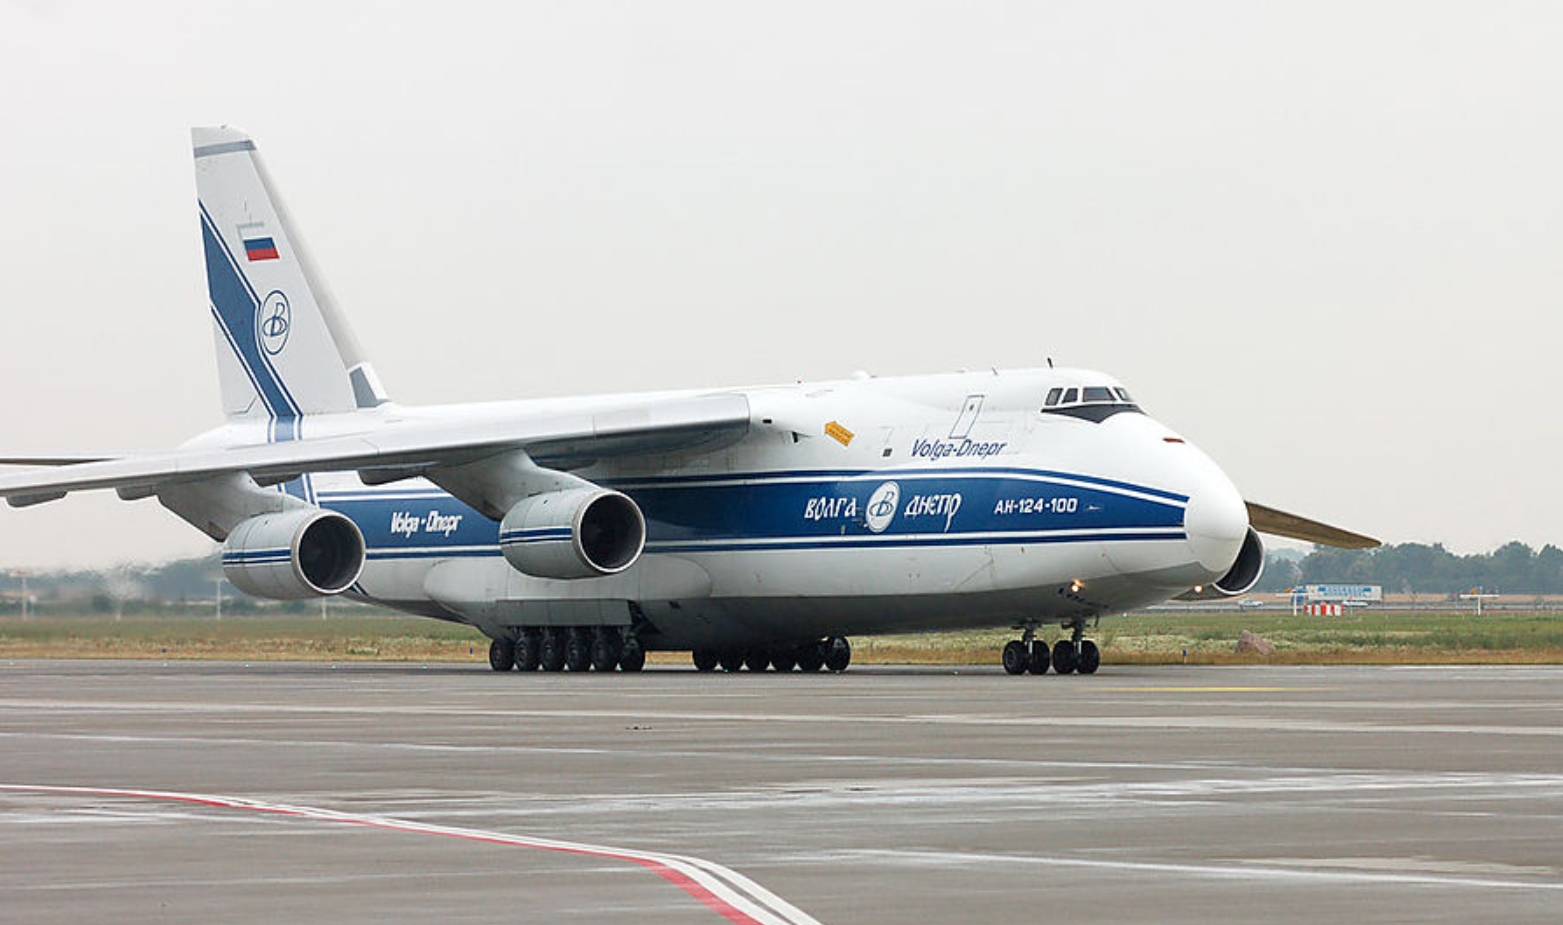 Ukraine to receive An-124 Ruslan aircraft confiscated by Canada from Russia